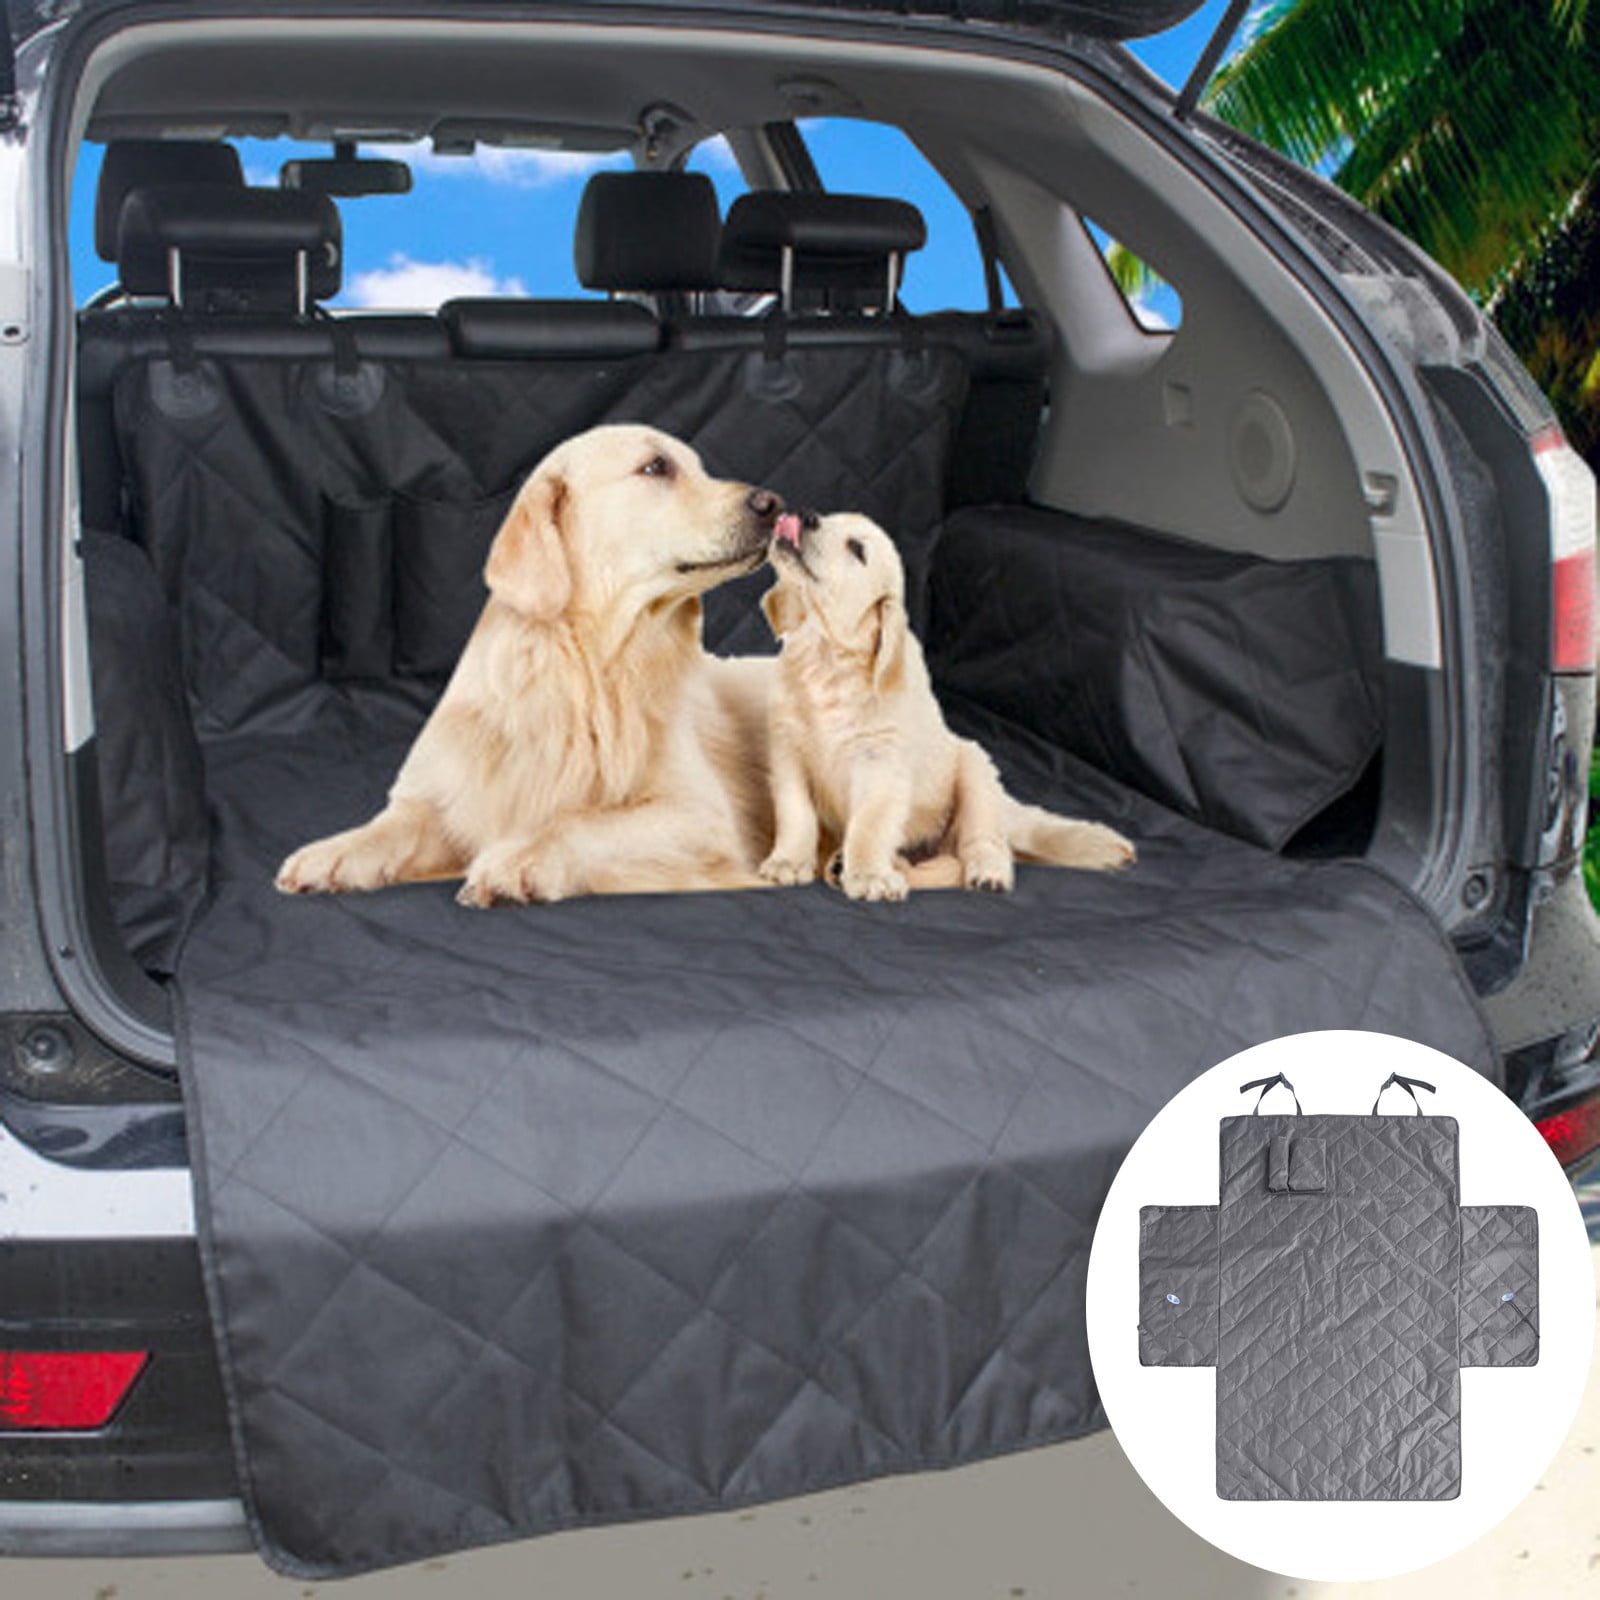 CAR BOOT COVER LINER FOR DOGS 4X4 ESTATE BOOT LINER MAT PROTECTOR KEEP BOOT TIDY 